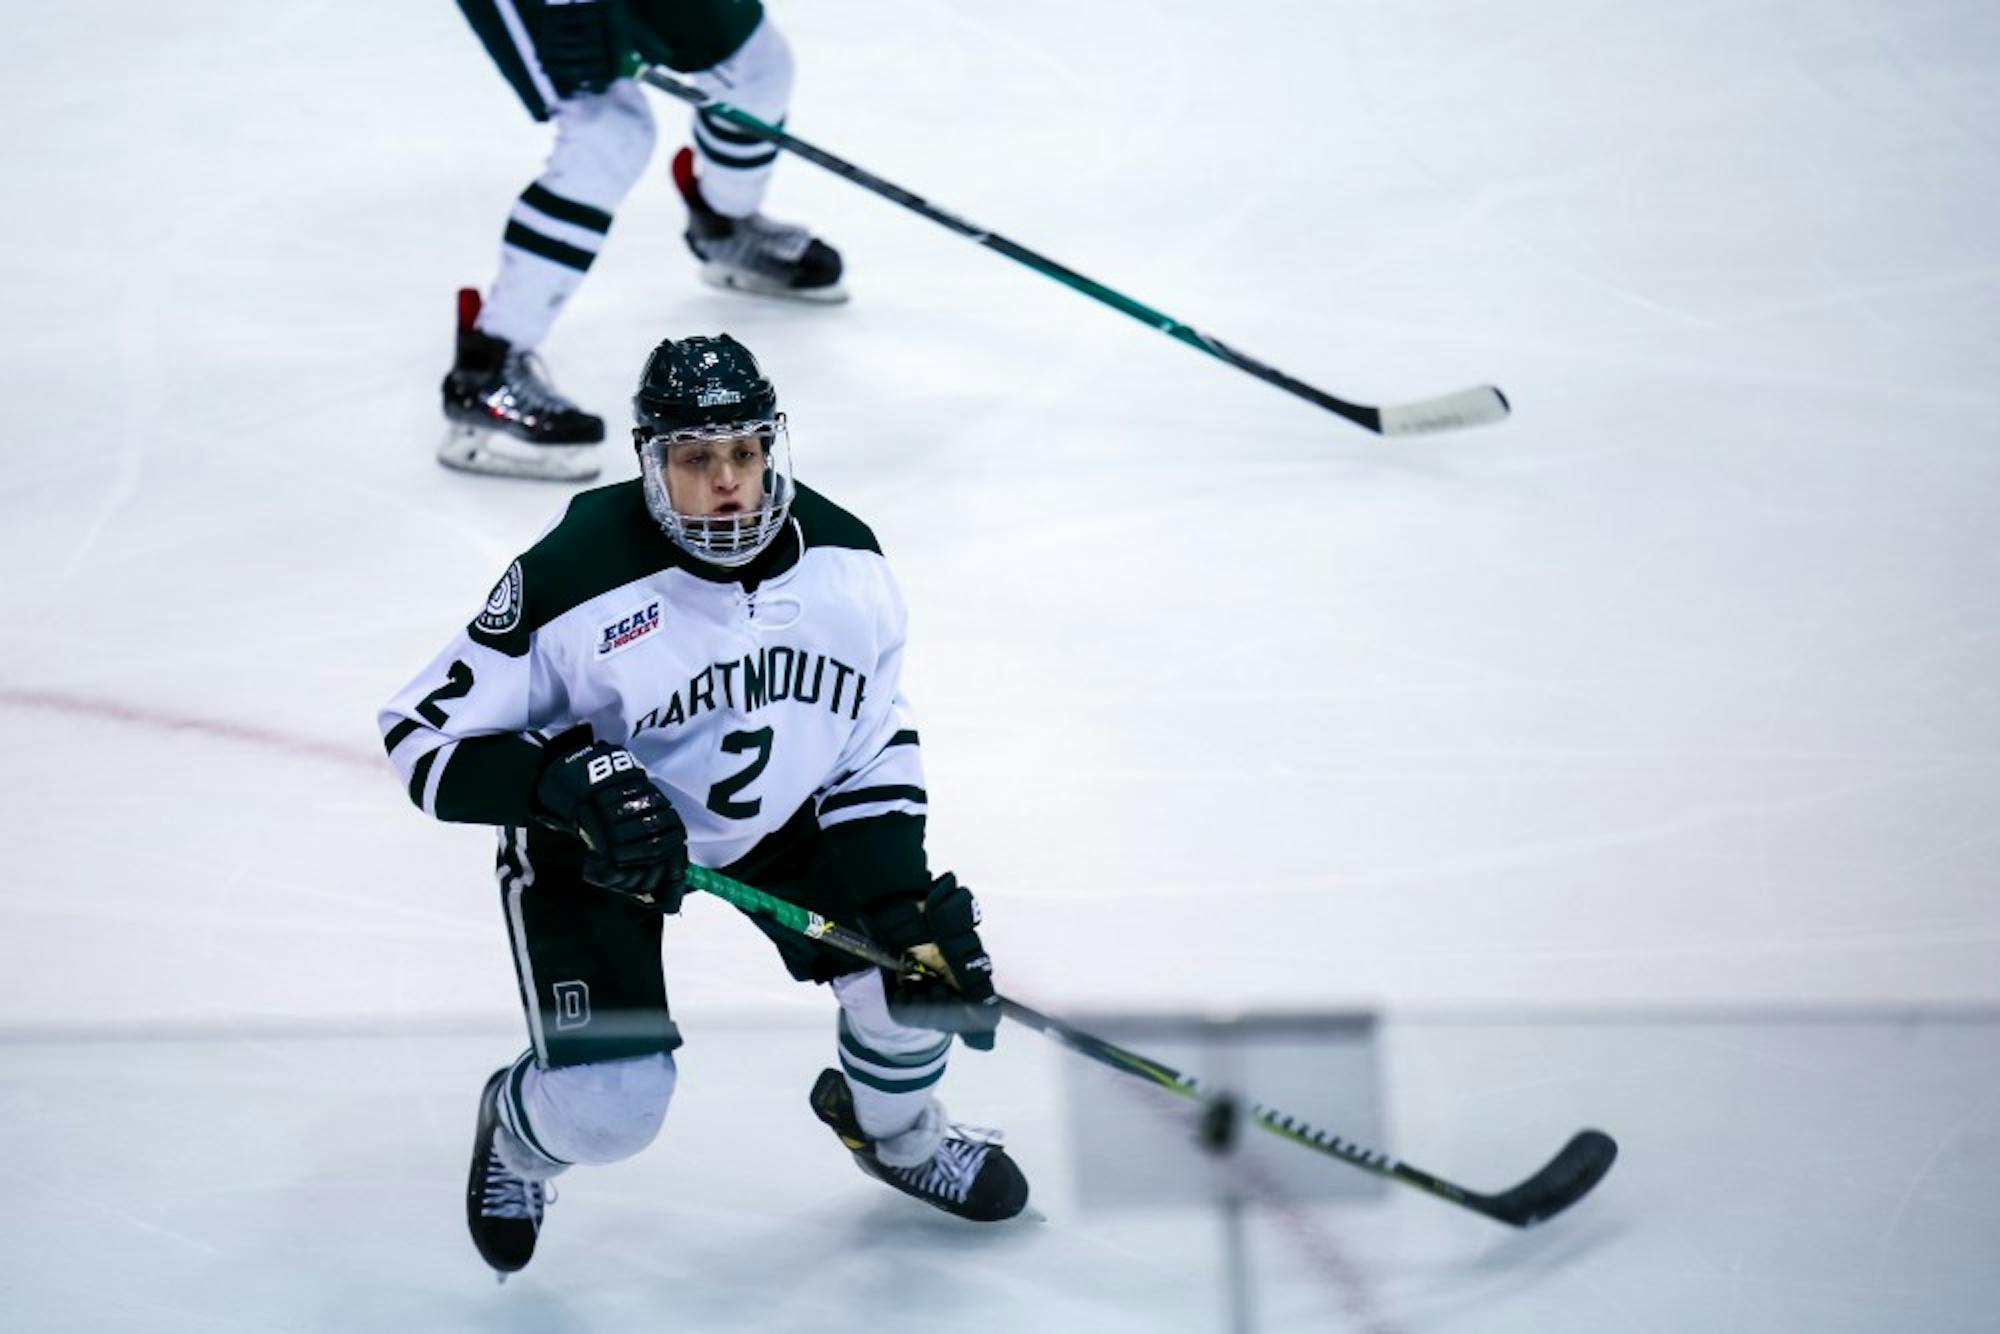 The men’s hockey team finished 1-1 at the 30th Ledyard Classic, defeating Army 5-2 but falling to Providence 5-3.